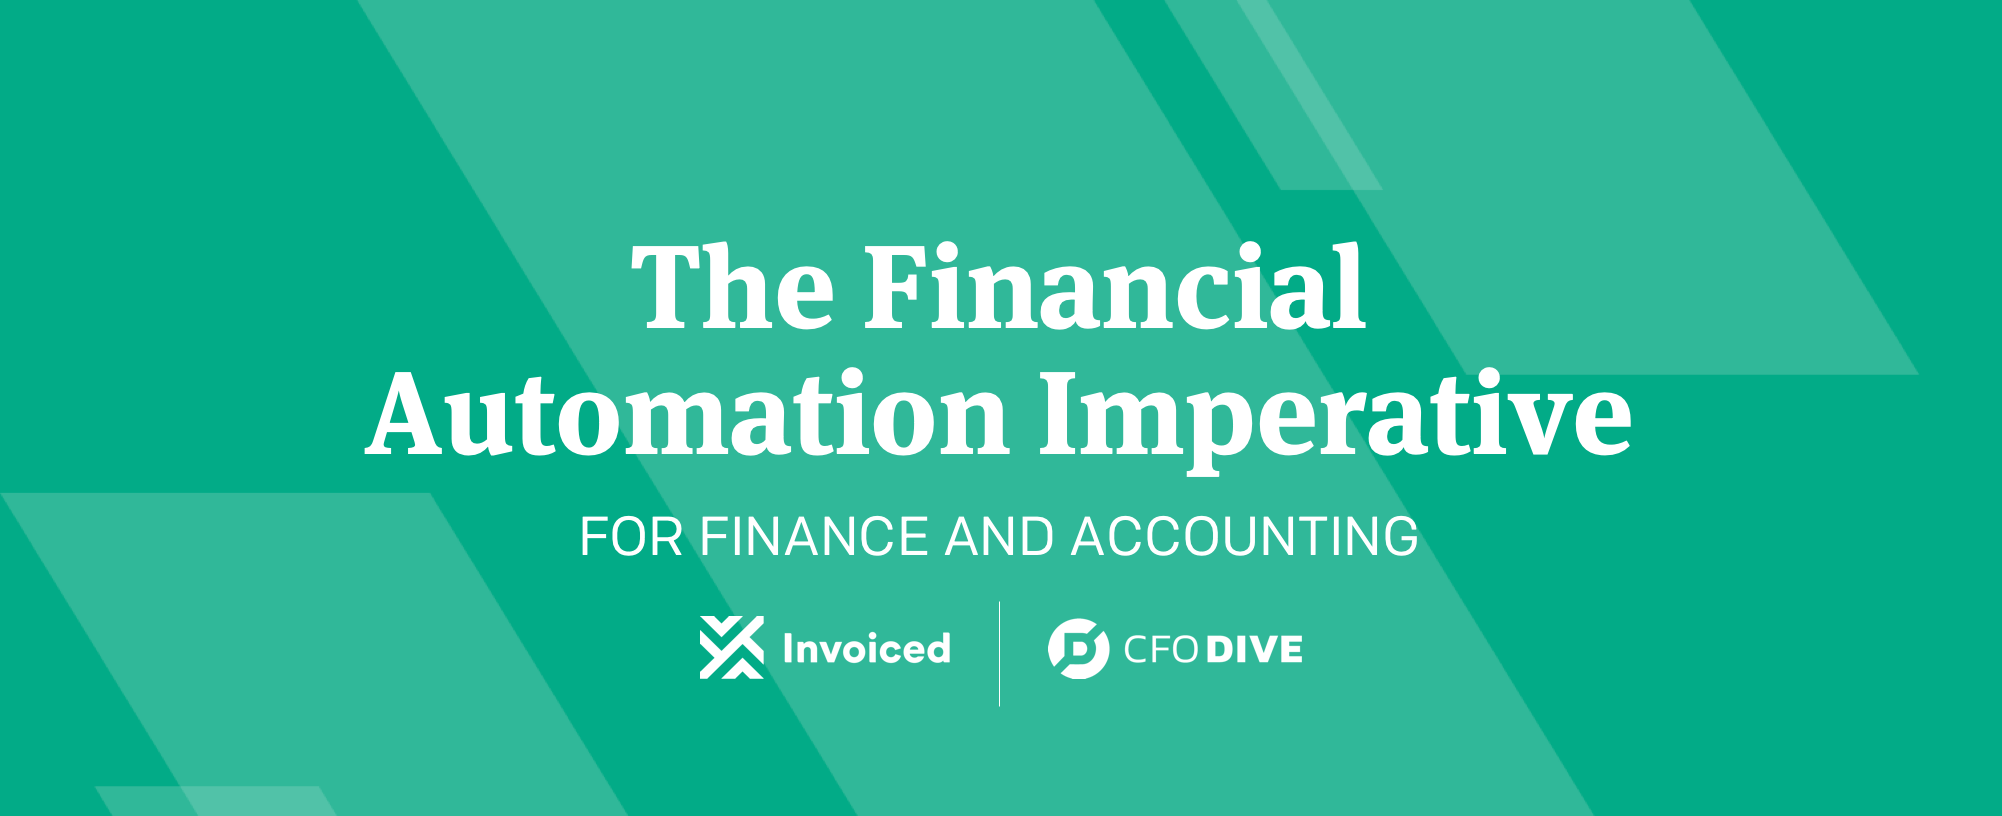 New research from Invoiced and CFO Dive reveals the plans, priorities and perspectives of finance/accounting professionals regarding financial automation.